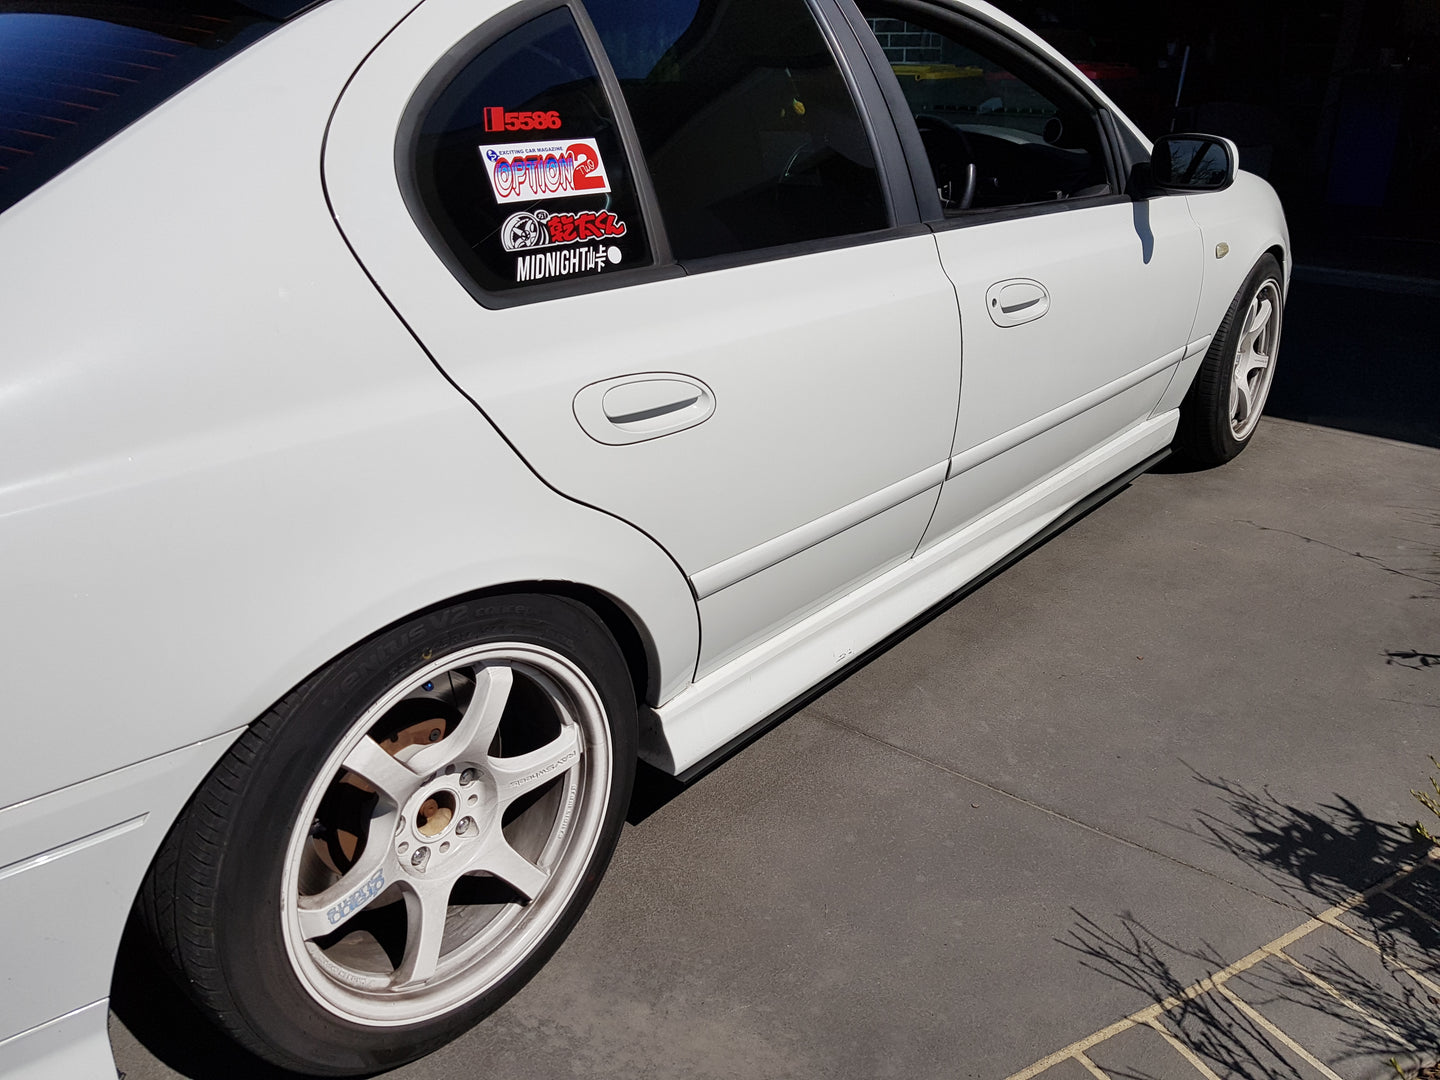 Ford Falcon BA/BF Side Skirt Extensions